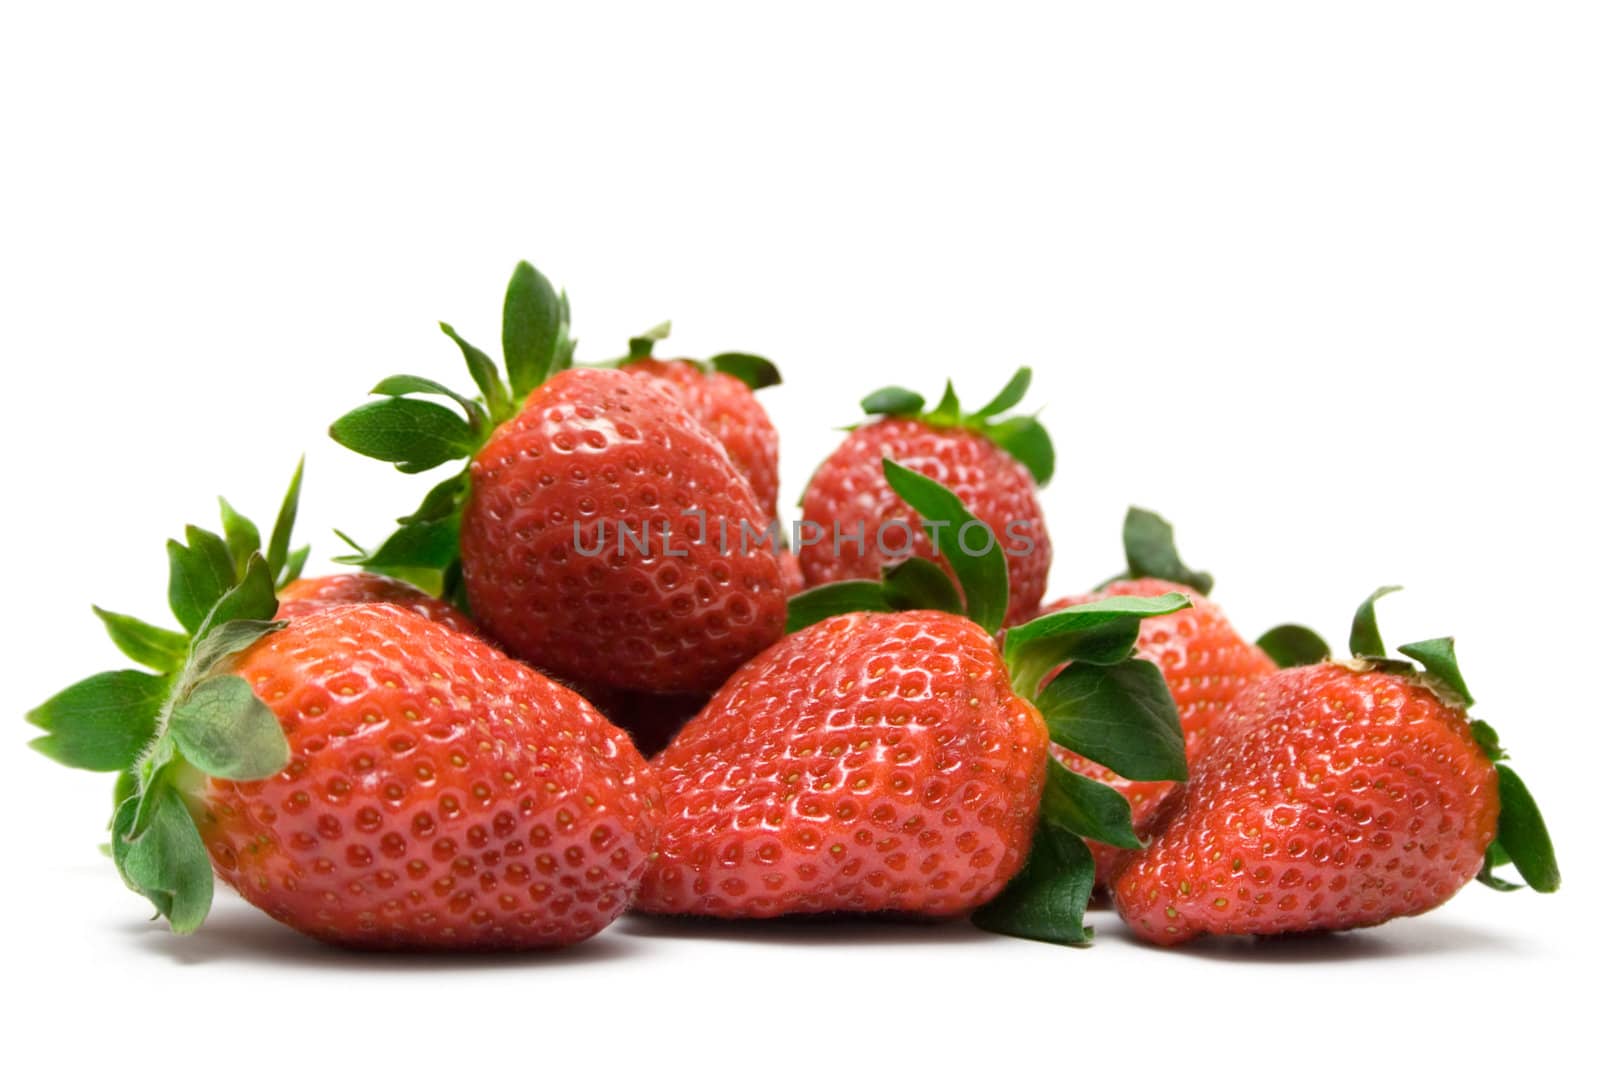 Bunch of Strawberries by winterling